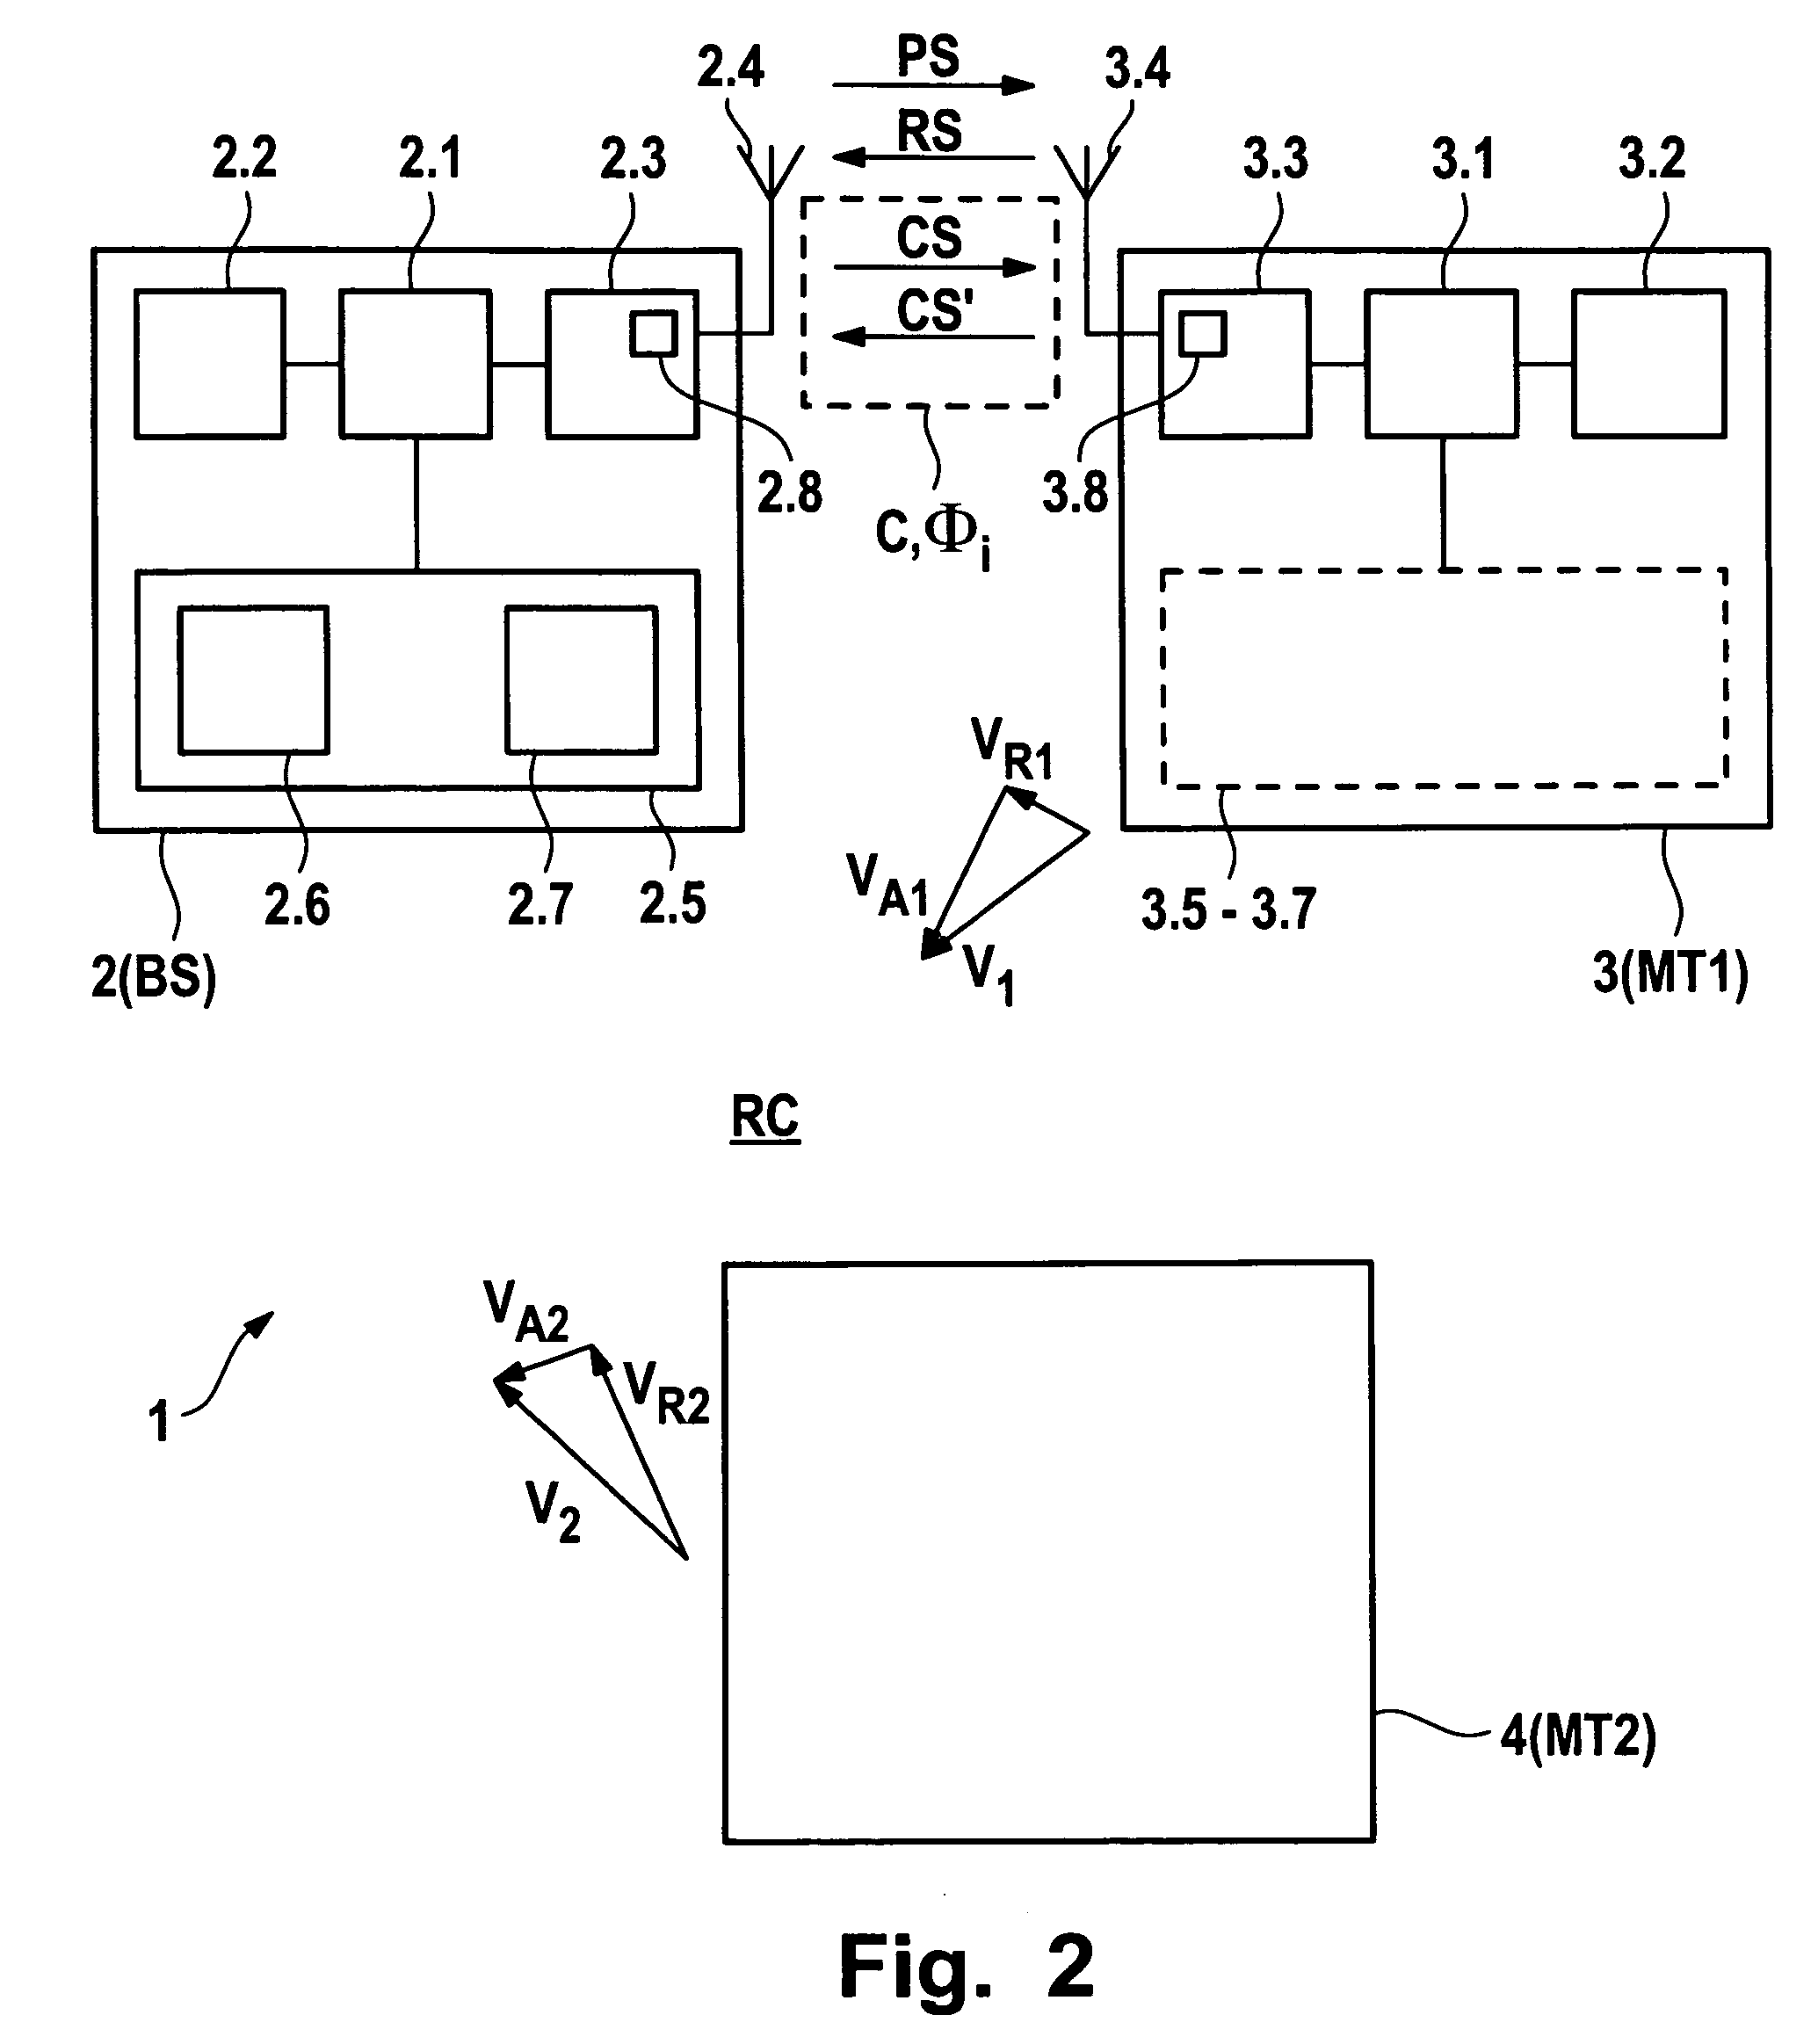 System and method for adapting system parameters in radio based communications systems